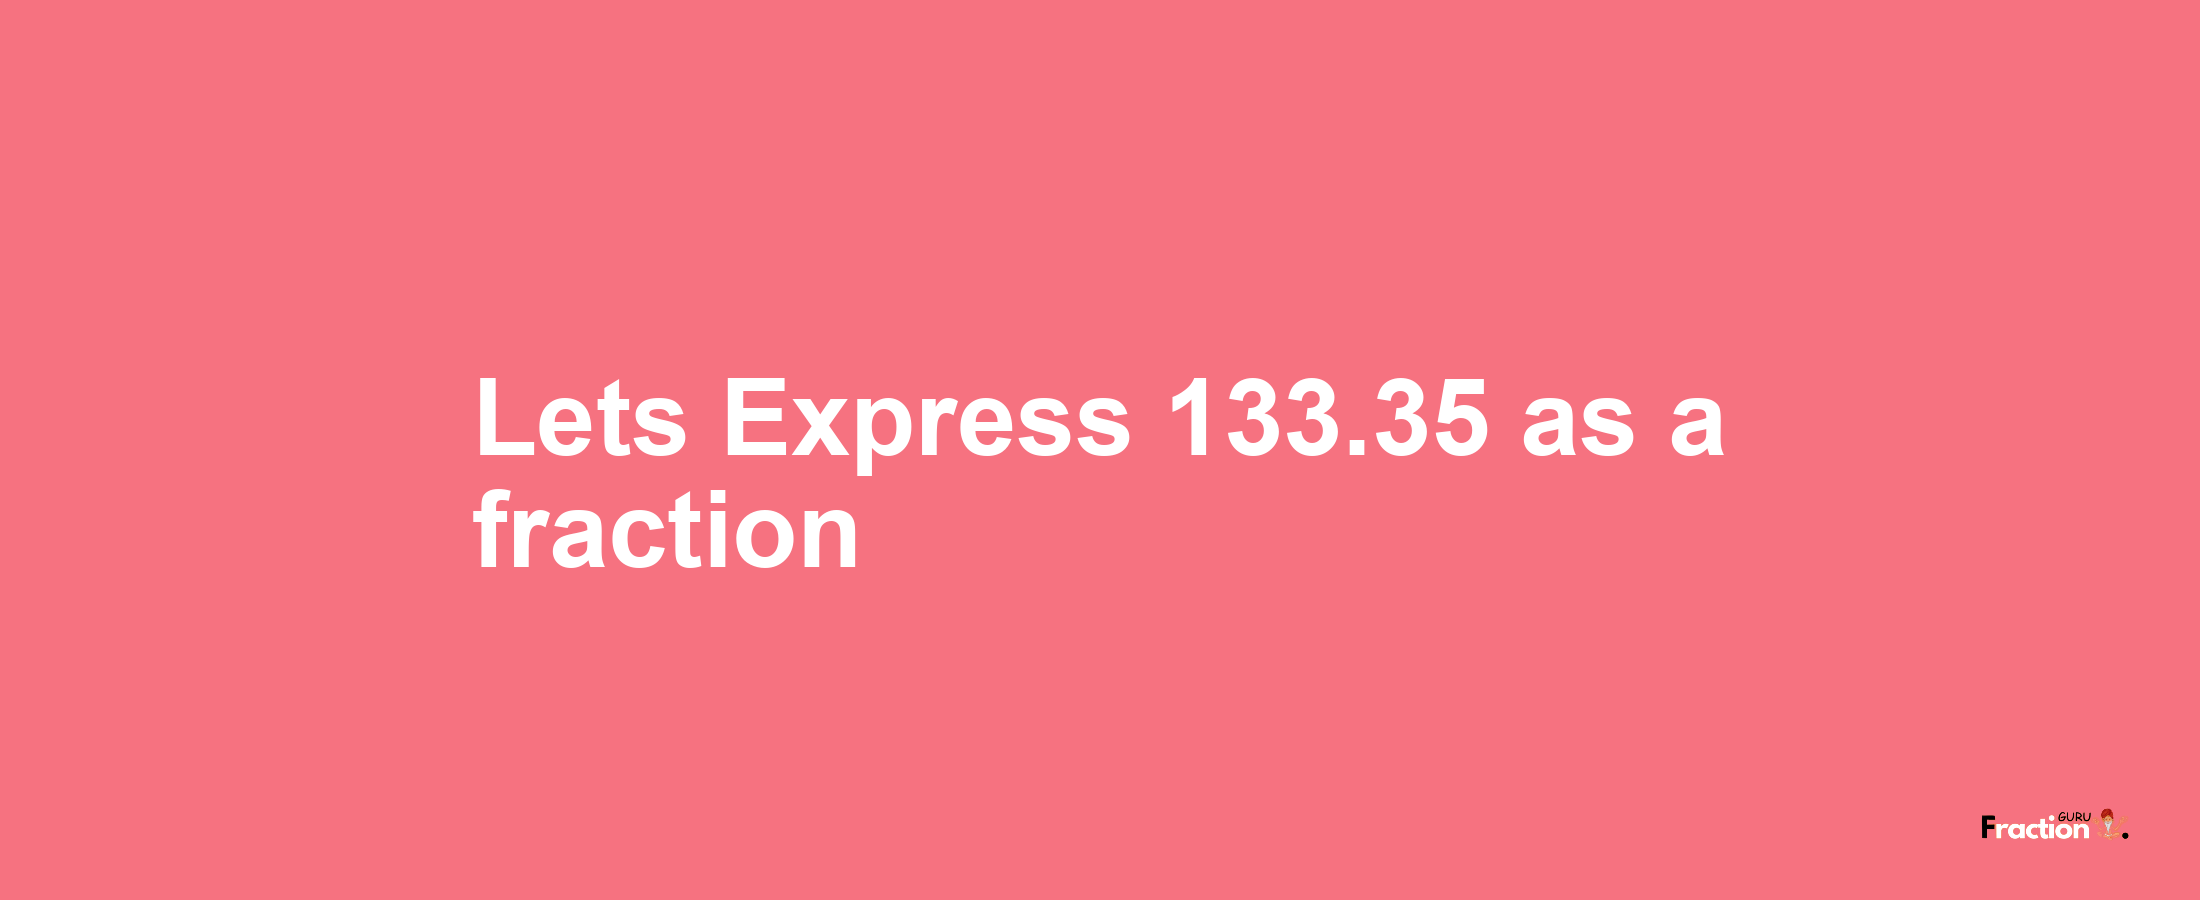 Lets Express 133.35 as afraction